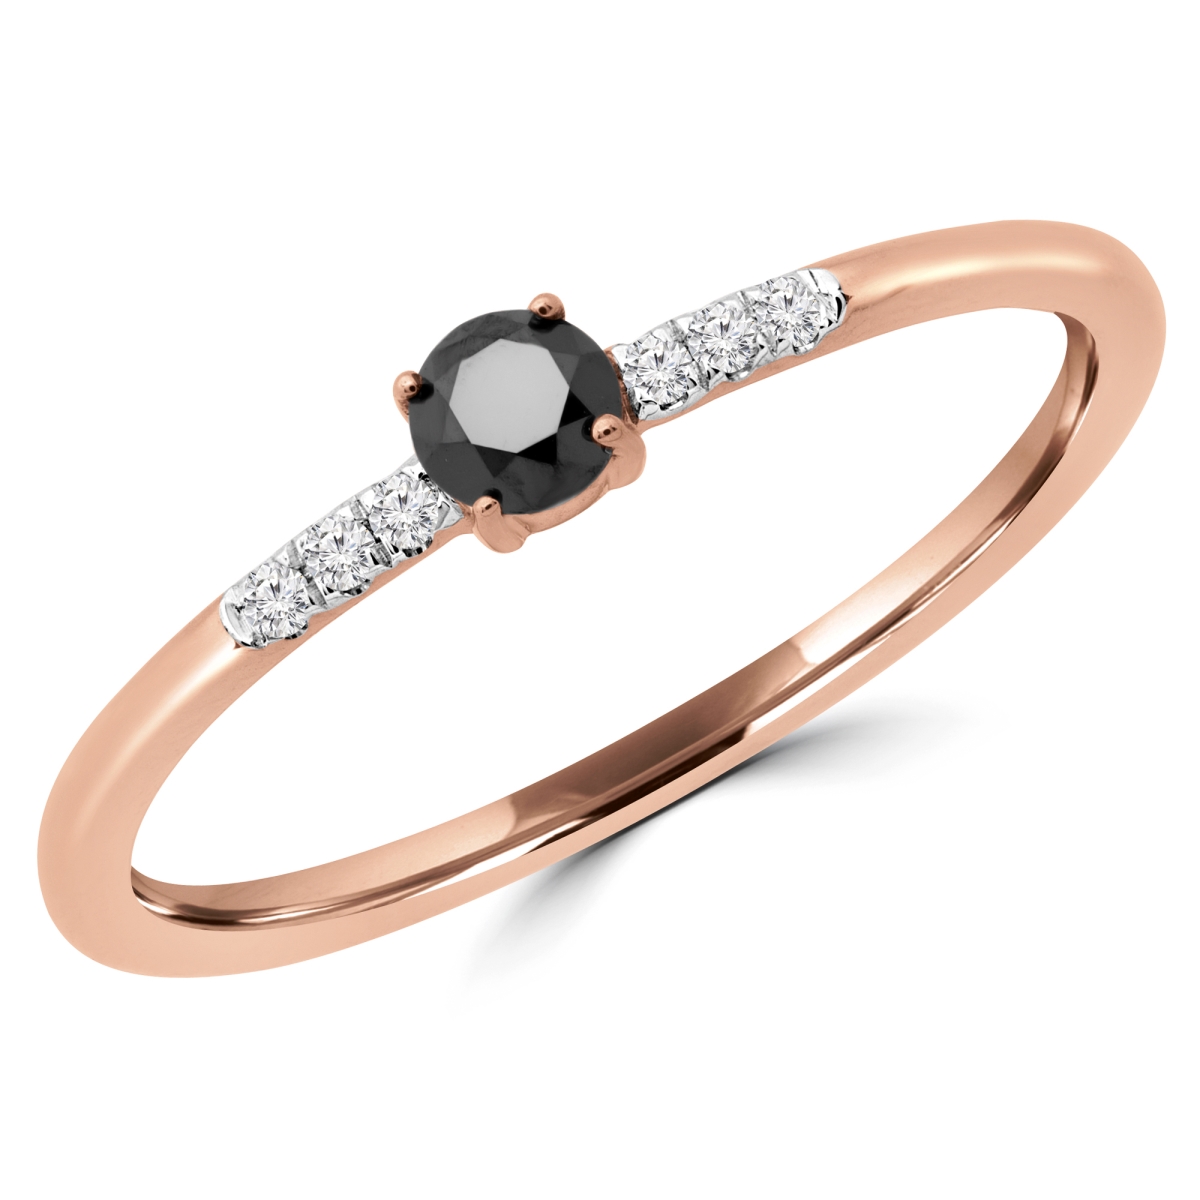 Picture of Majesty Diamonds MDR190079-3.25 0.16 CTW Round Black Diamond Bezel Set Cocktail Ring in 14K Rose Gold - Size 3.25